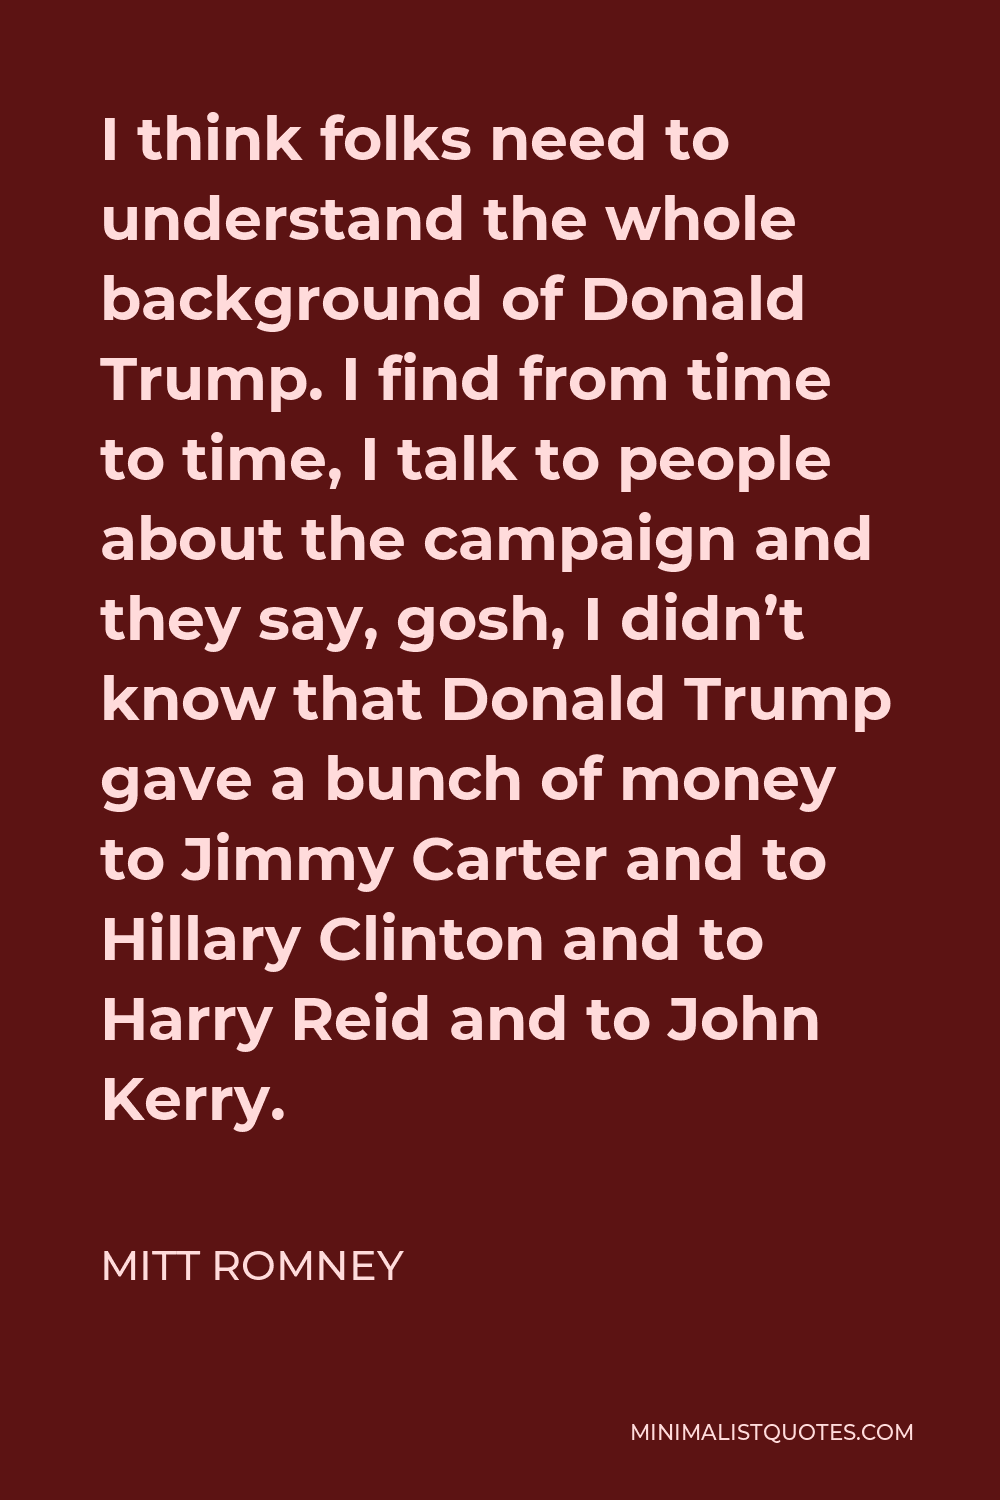 Mitt Romney Quote - I think folks need to understand the whole background of Donald Trump. I find from time to time, I talk to people about the campaign and they say, gosh, I didn’t know that Donald Trump gave a bunch of money to Jimmy Carter and to Hillary Clinton and to Harry Reid and to John Kerry.